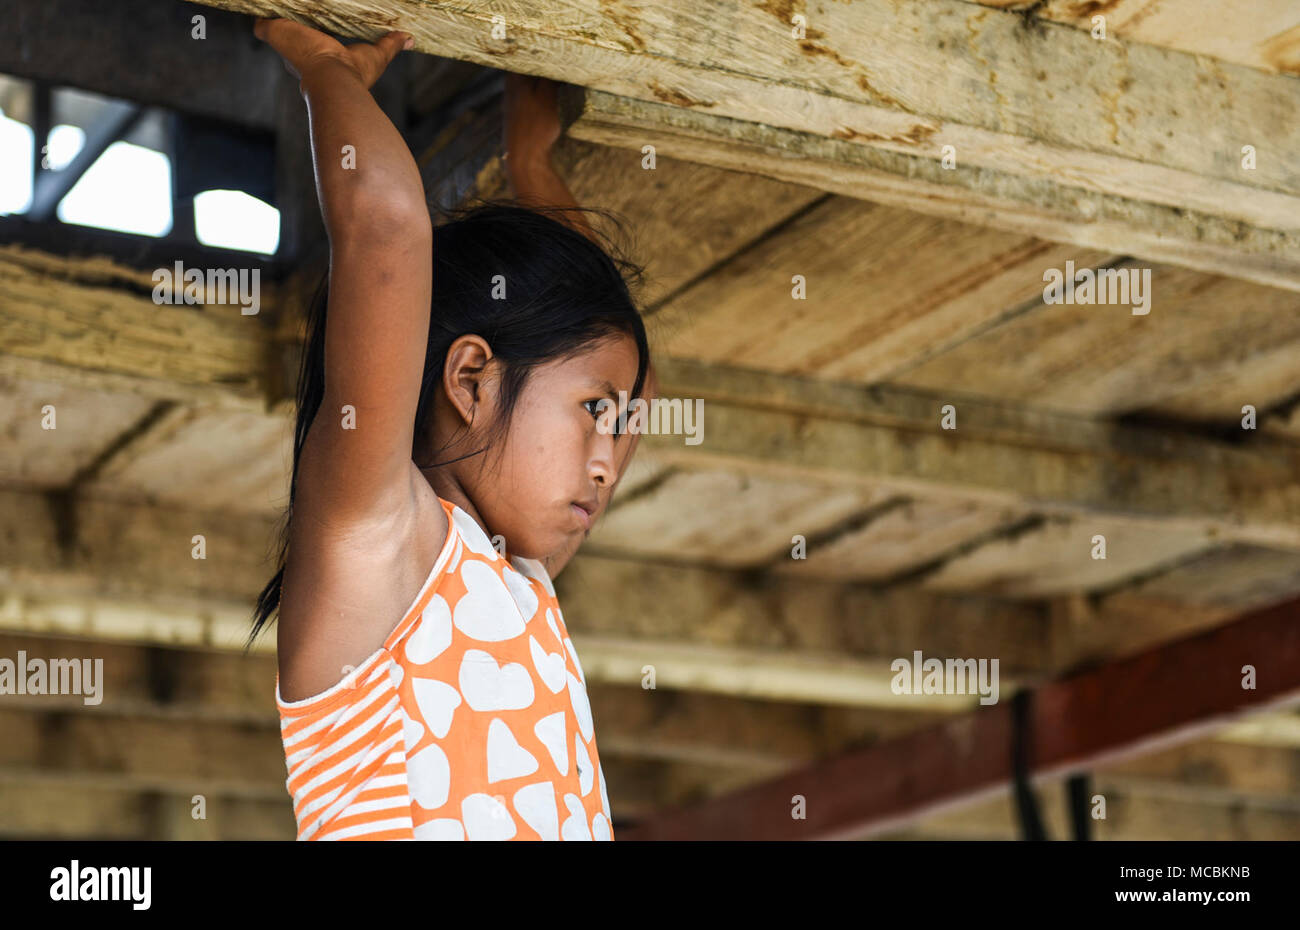 A child in the Cémaco Province, Panama, holds on to a raised floor March 28, 2018, during Exercise New Horizons 2018. Exercise New Horizons is a joint training exercise where all branches of the U.S. military conduct training in civil engineer, medical and support services while benefiting the local community. The exercise will assist children throughout the region by providing medical assistance and facilities such as schools, a youth community center and a women’s health ward. Stock Photo